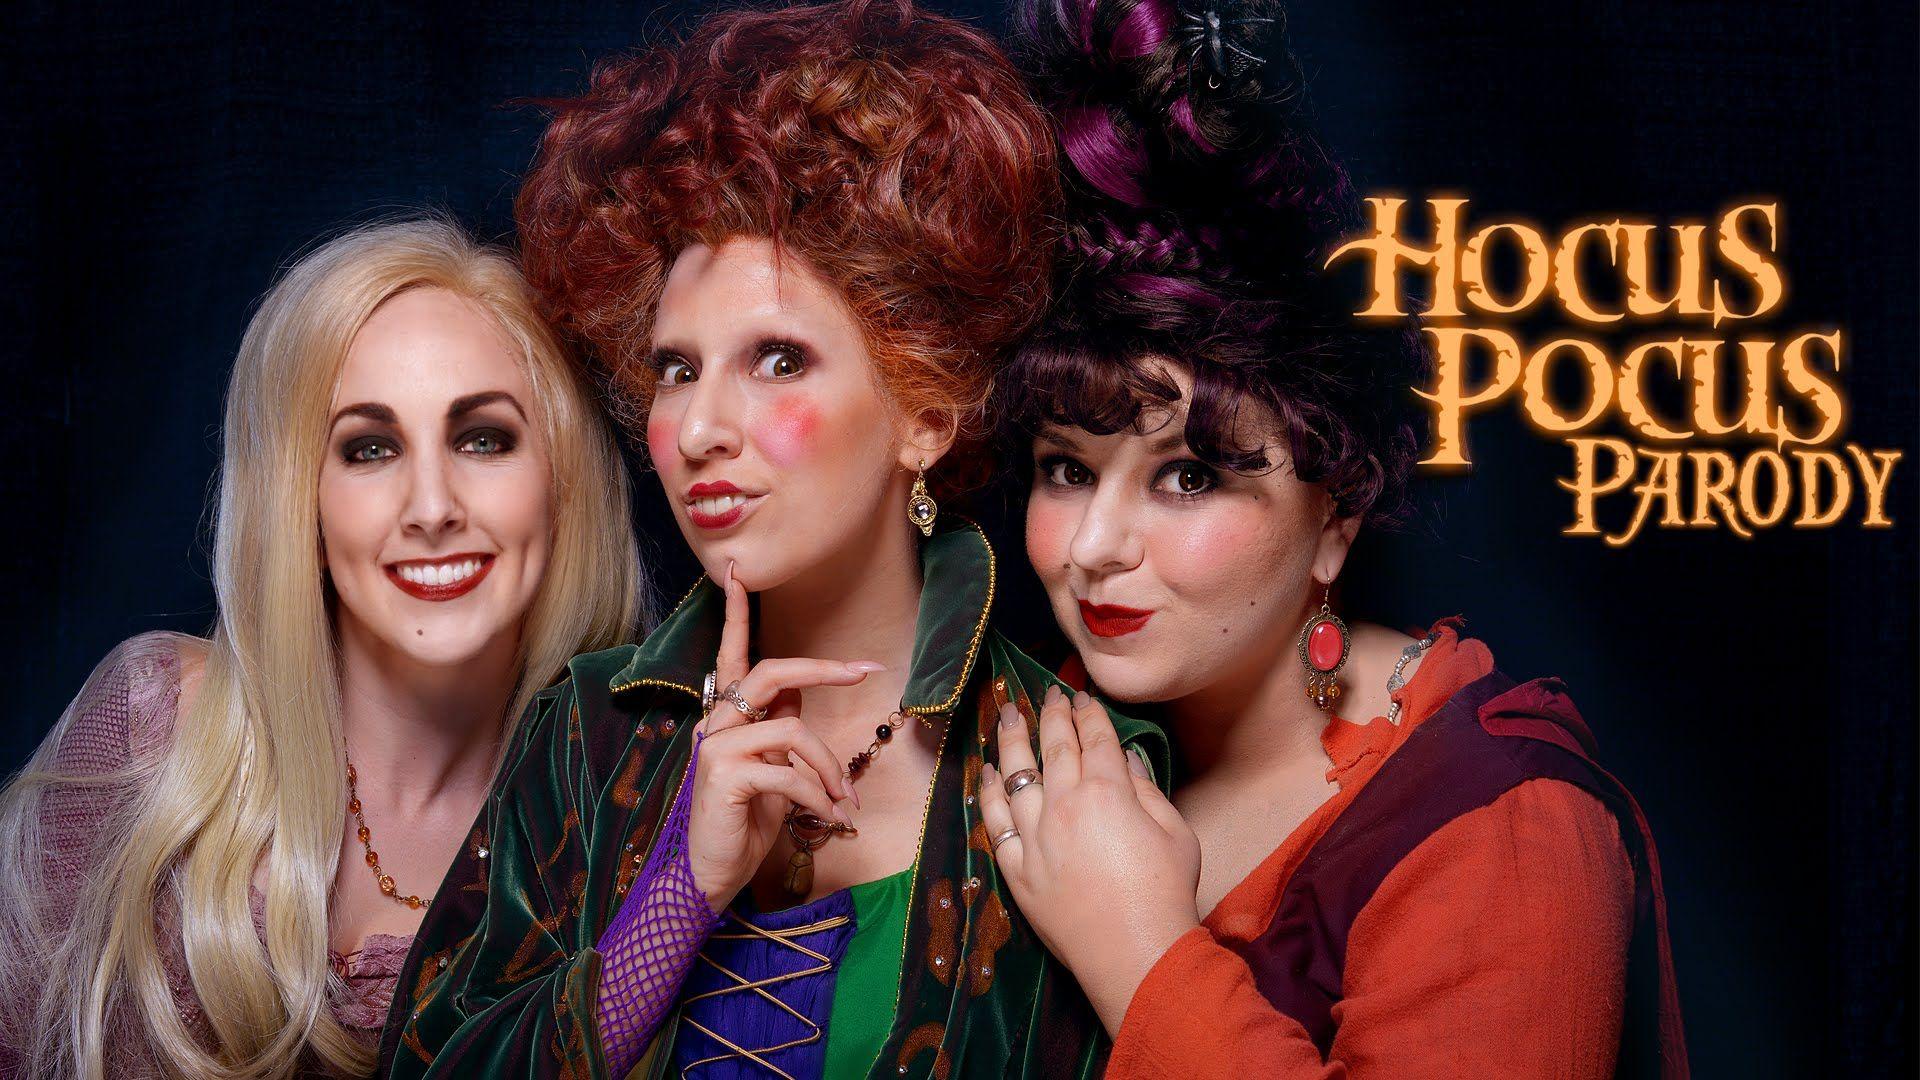 Hocus Pocus Parody by The Hillywood Show ®.